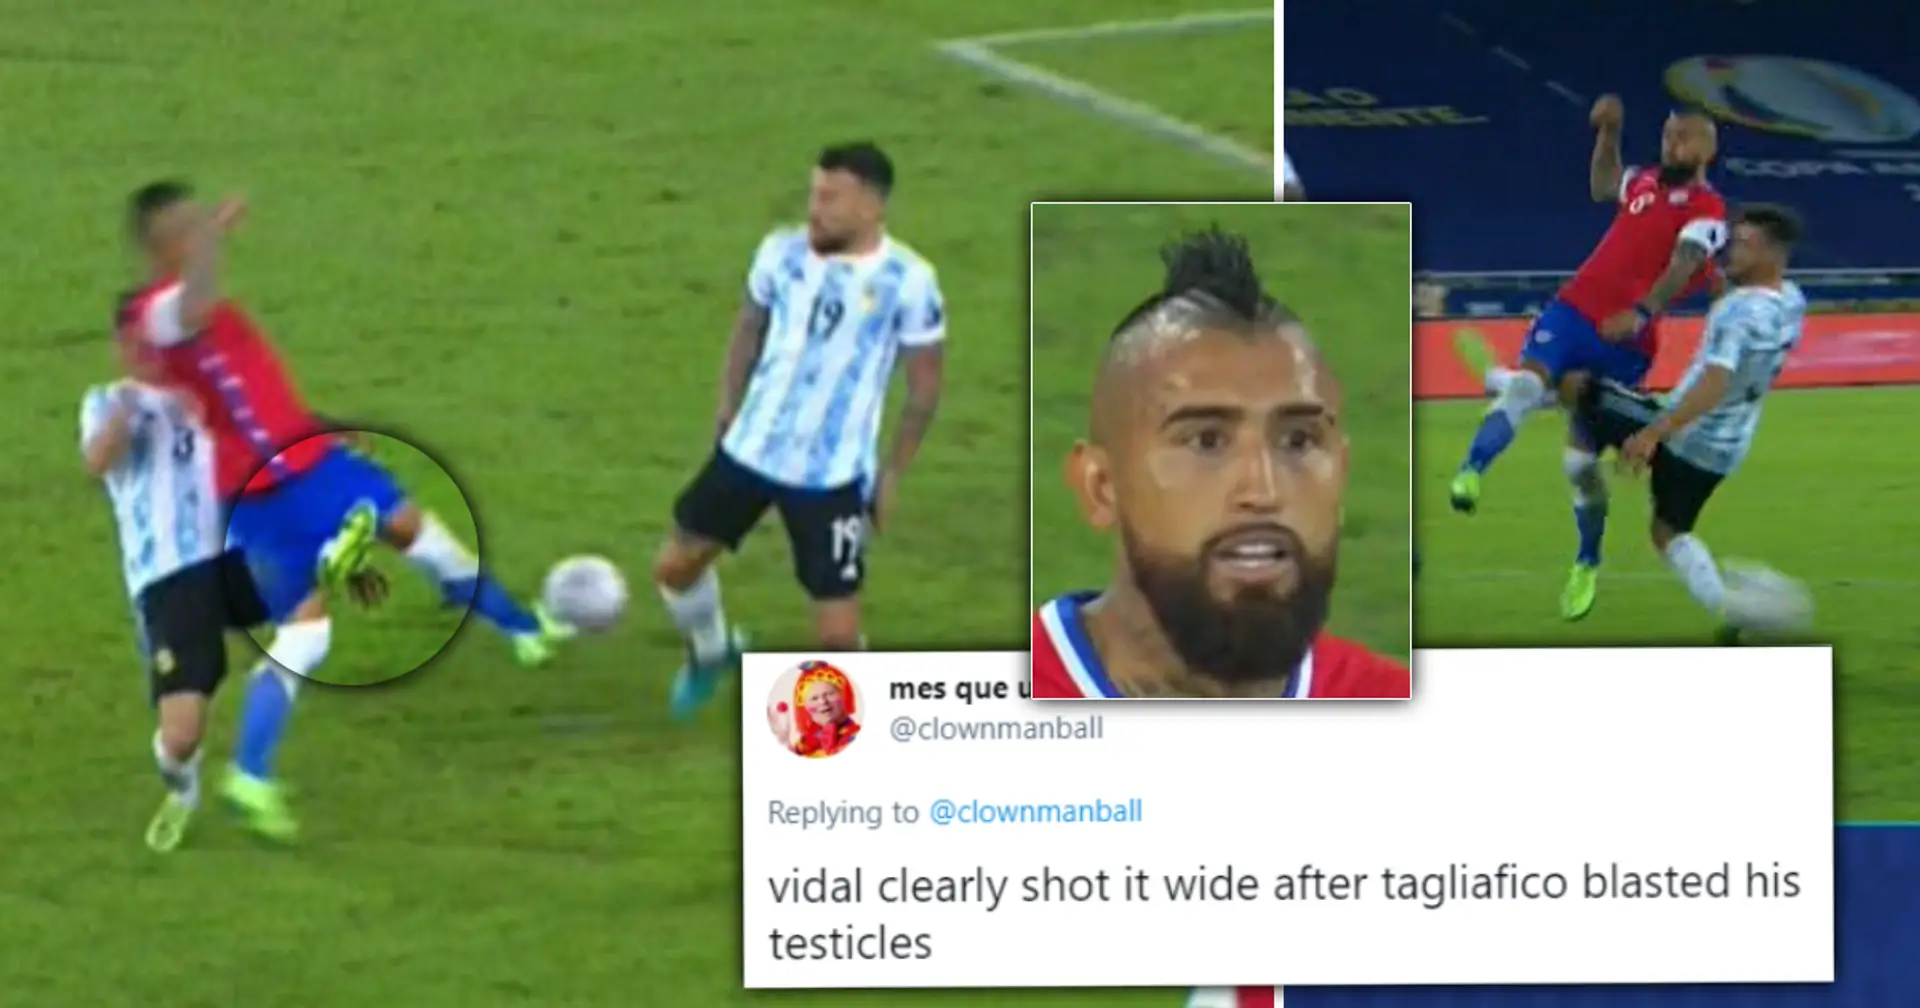 'Tries his best to turn Vidal into a eunuch': Chile wins controversial pen after leg meets balls 